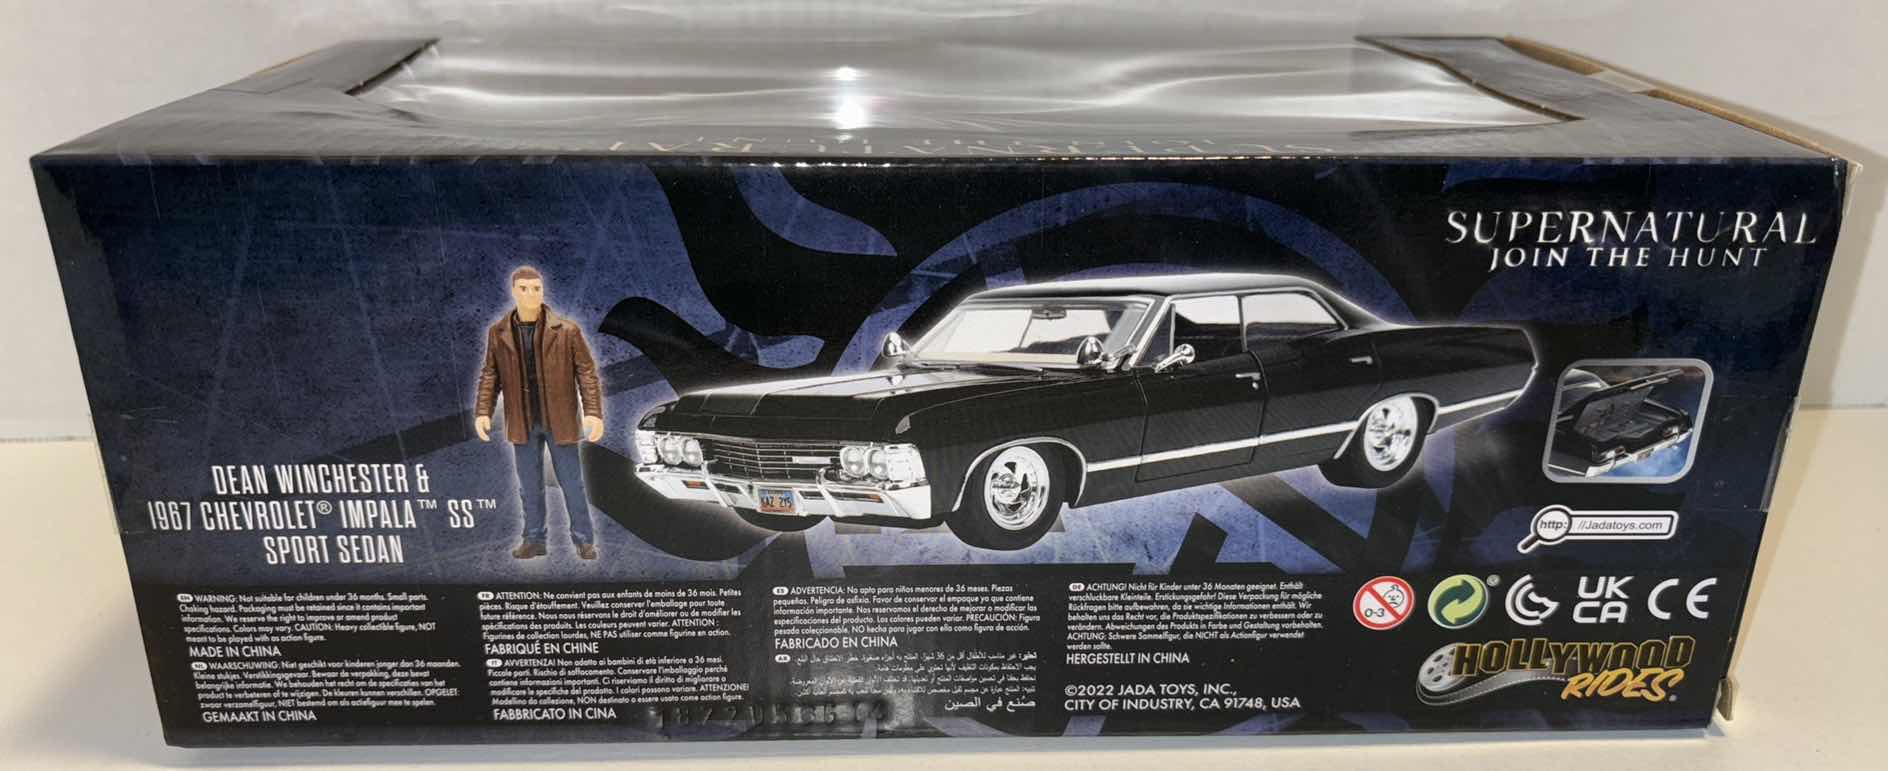 Photo 3 of NEW JADA TOYS HOLLYWOOD RIDES FIGURE & DIE-CAST VEHICLE, SUPERNATURAL JOIN THE HUNT “DEAN WINCHESTER & 1967 CHEVROLET IMPALA SS SPORT SEDAN”